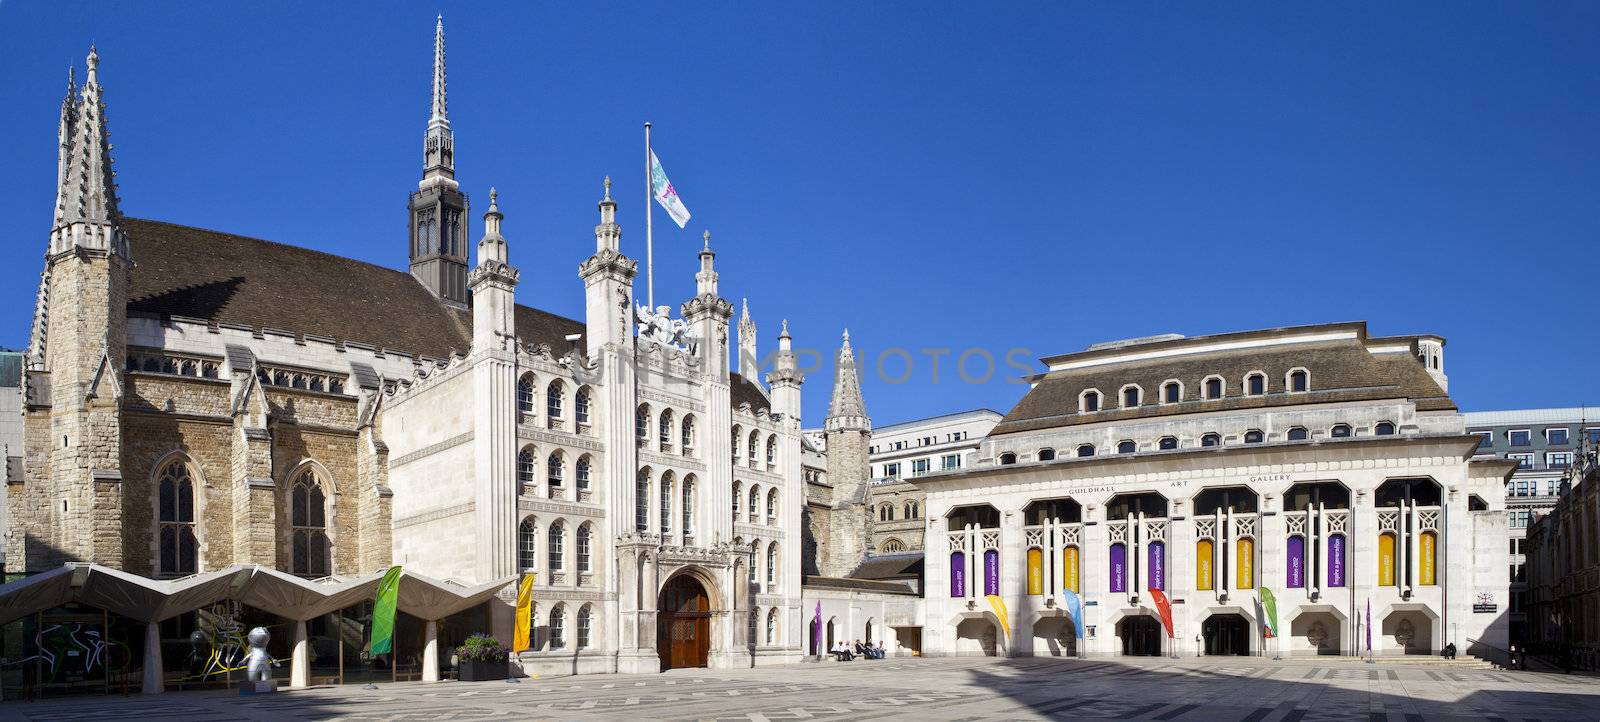 London Guildhall and Guildhall Art Gallery by chrisdorney